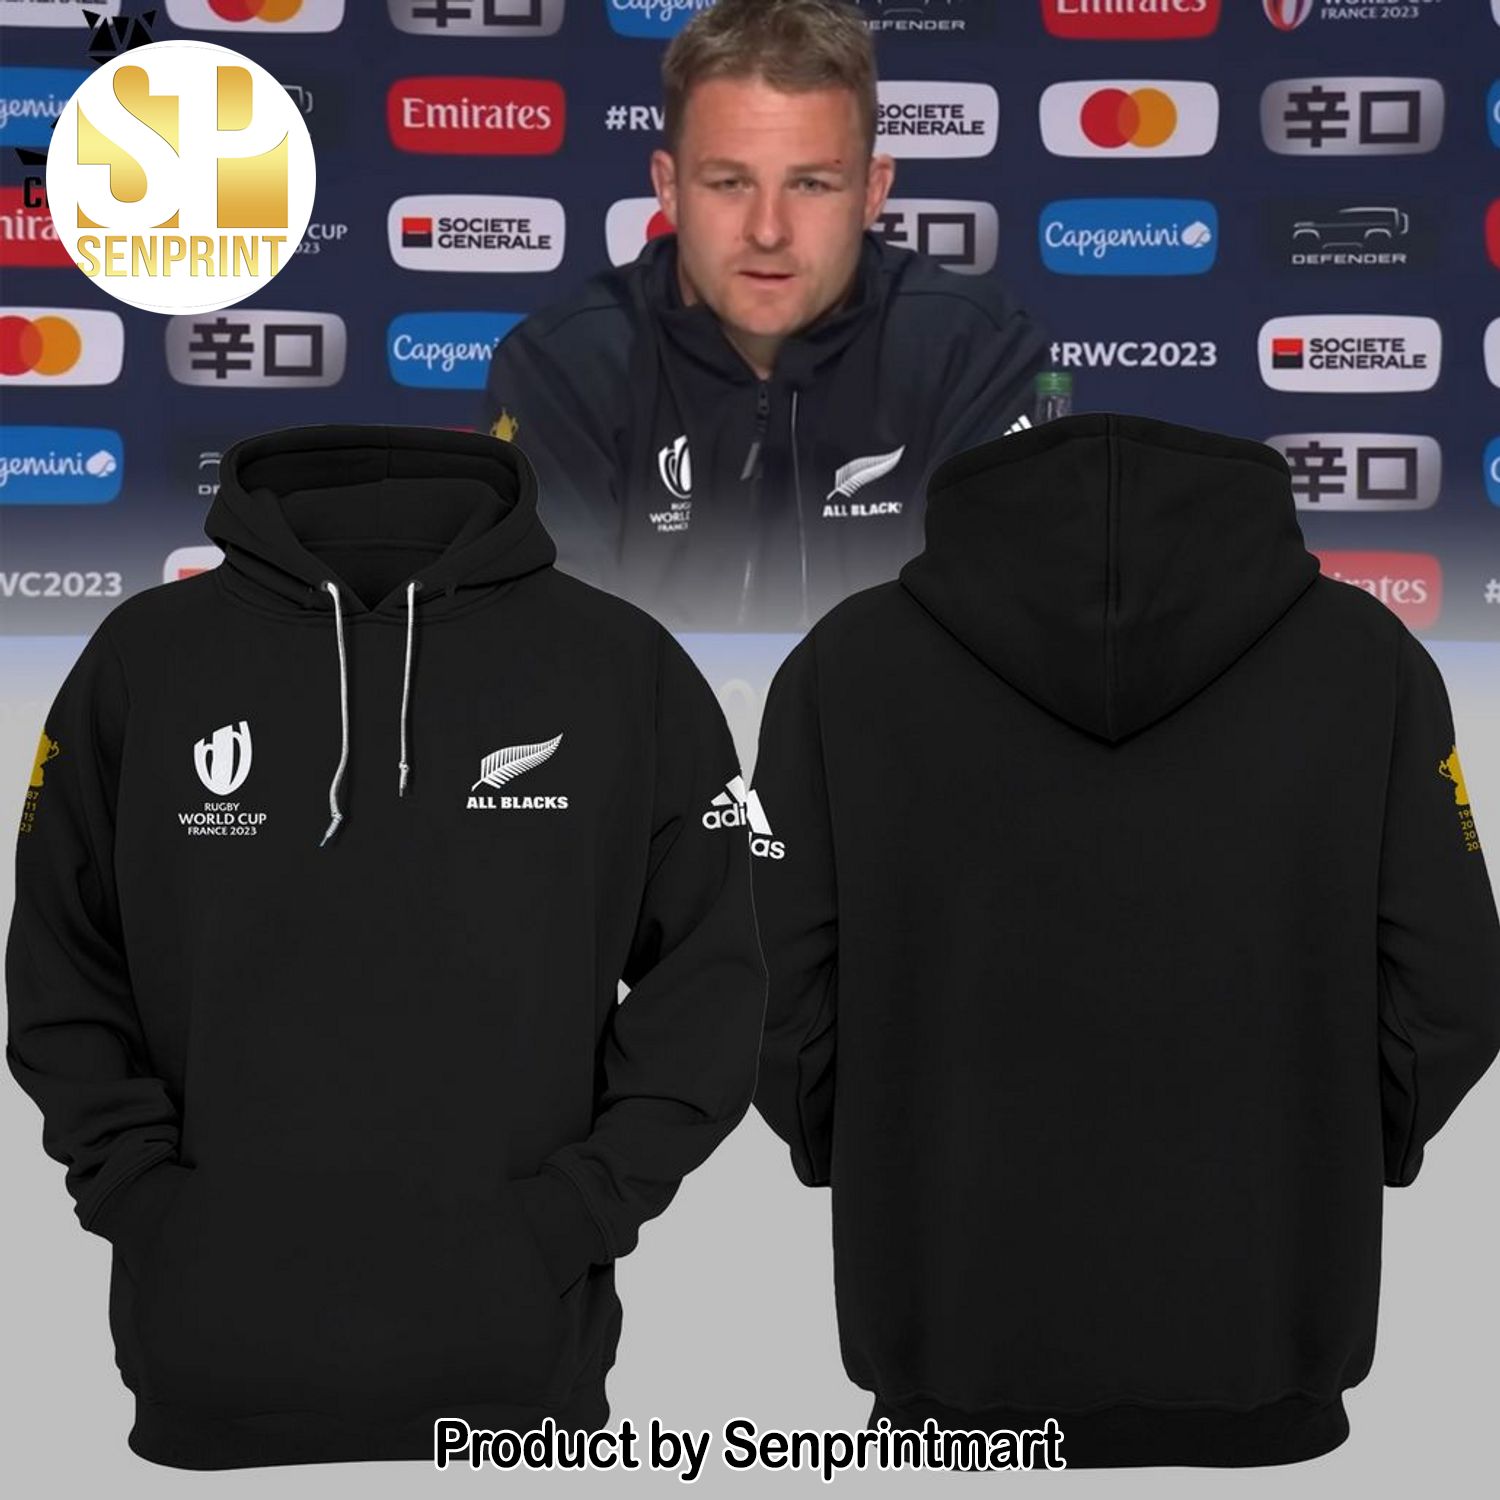 Up The All Blacks New Zealand Rugby Worldcup France 2023 Logo Design On Sleeve All Over Printed Shirt